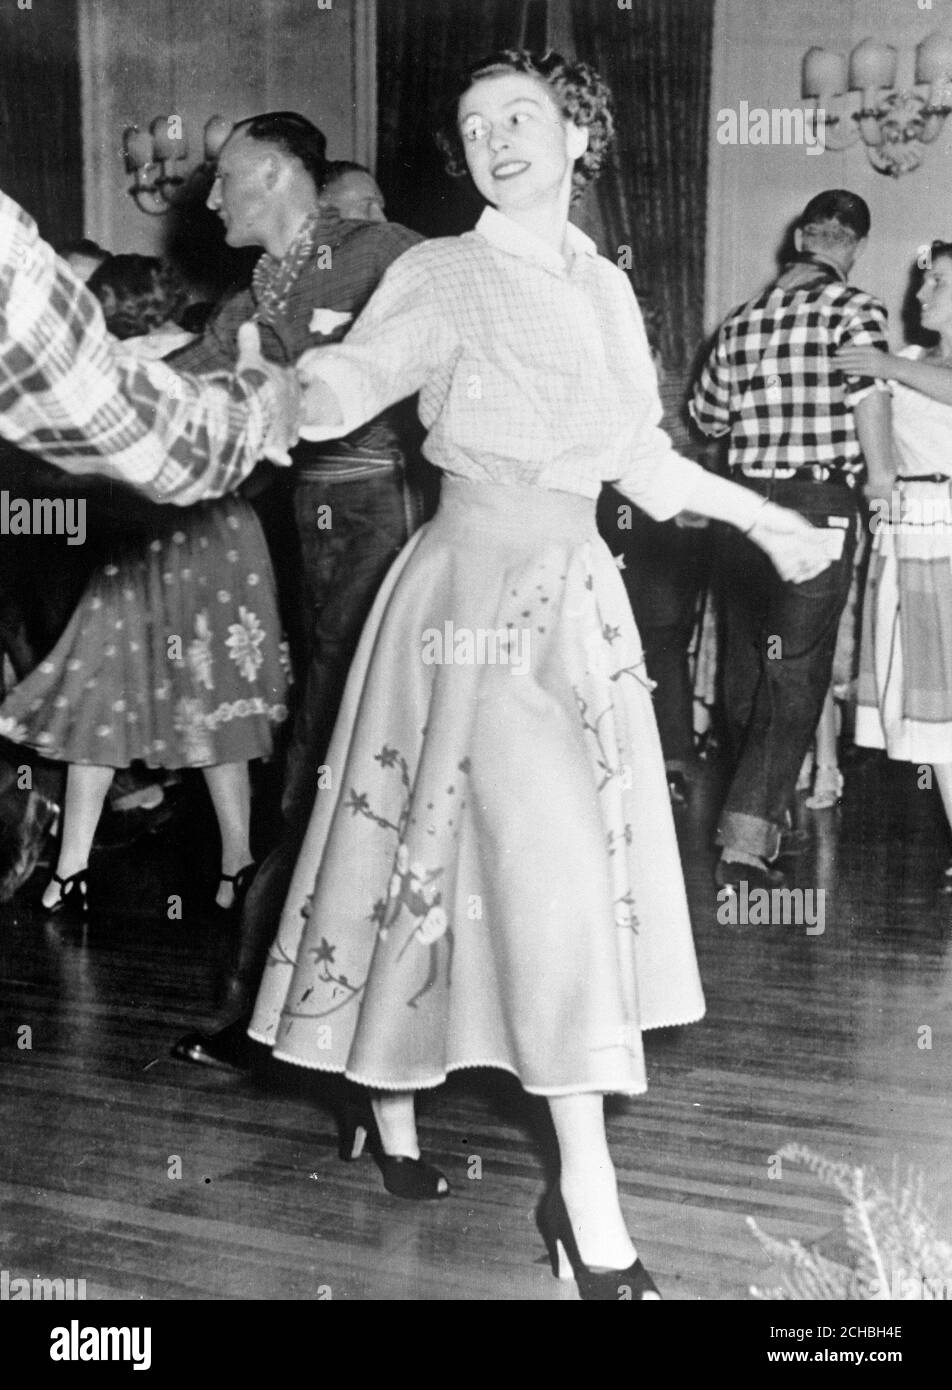 Princess Elizabeth square dancing at the Governor General's residence at Rideau Hall, Ottawa, during her tour of Canada. In background wearing a check shirt is Prince Philip. Stock Photo